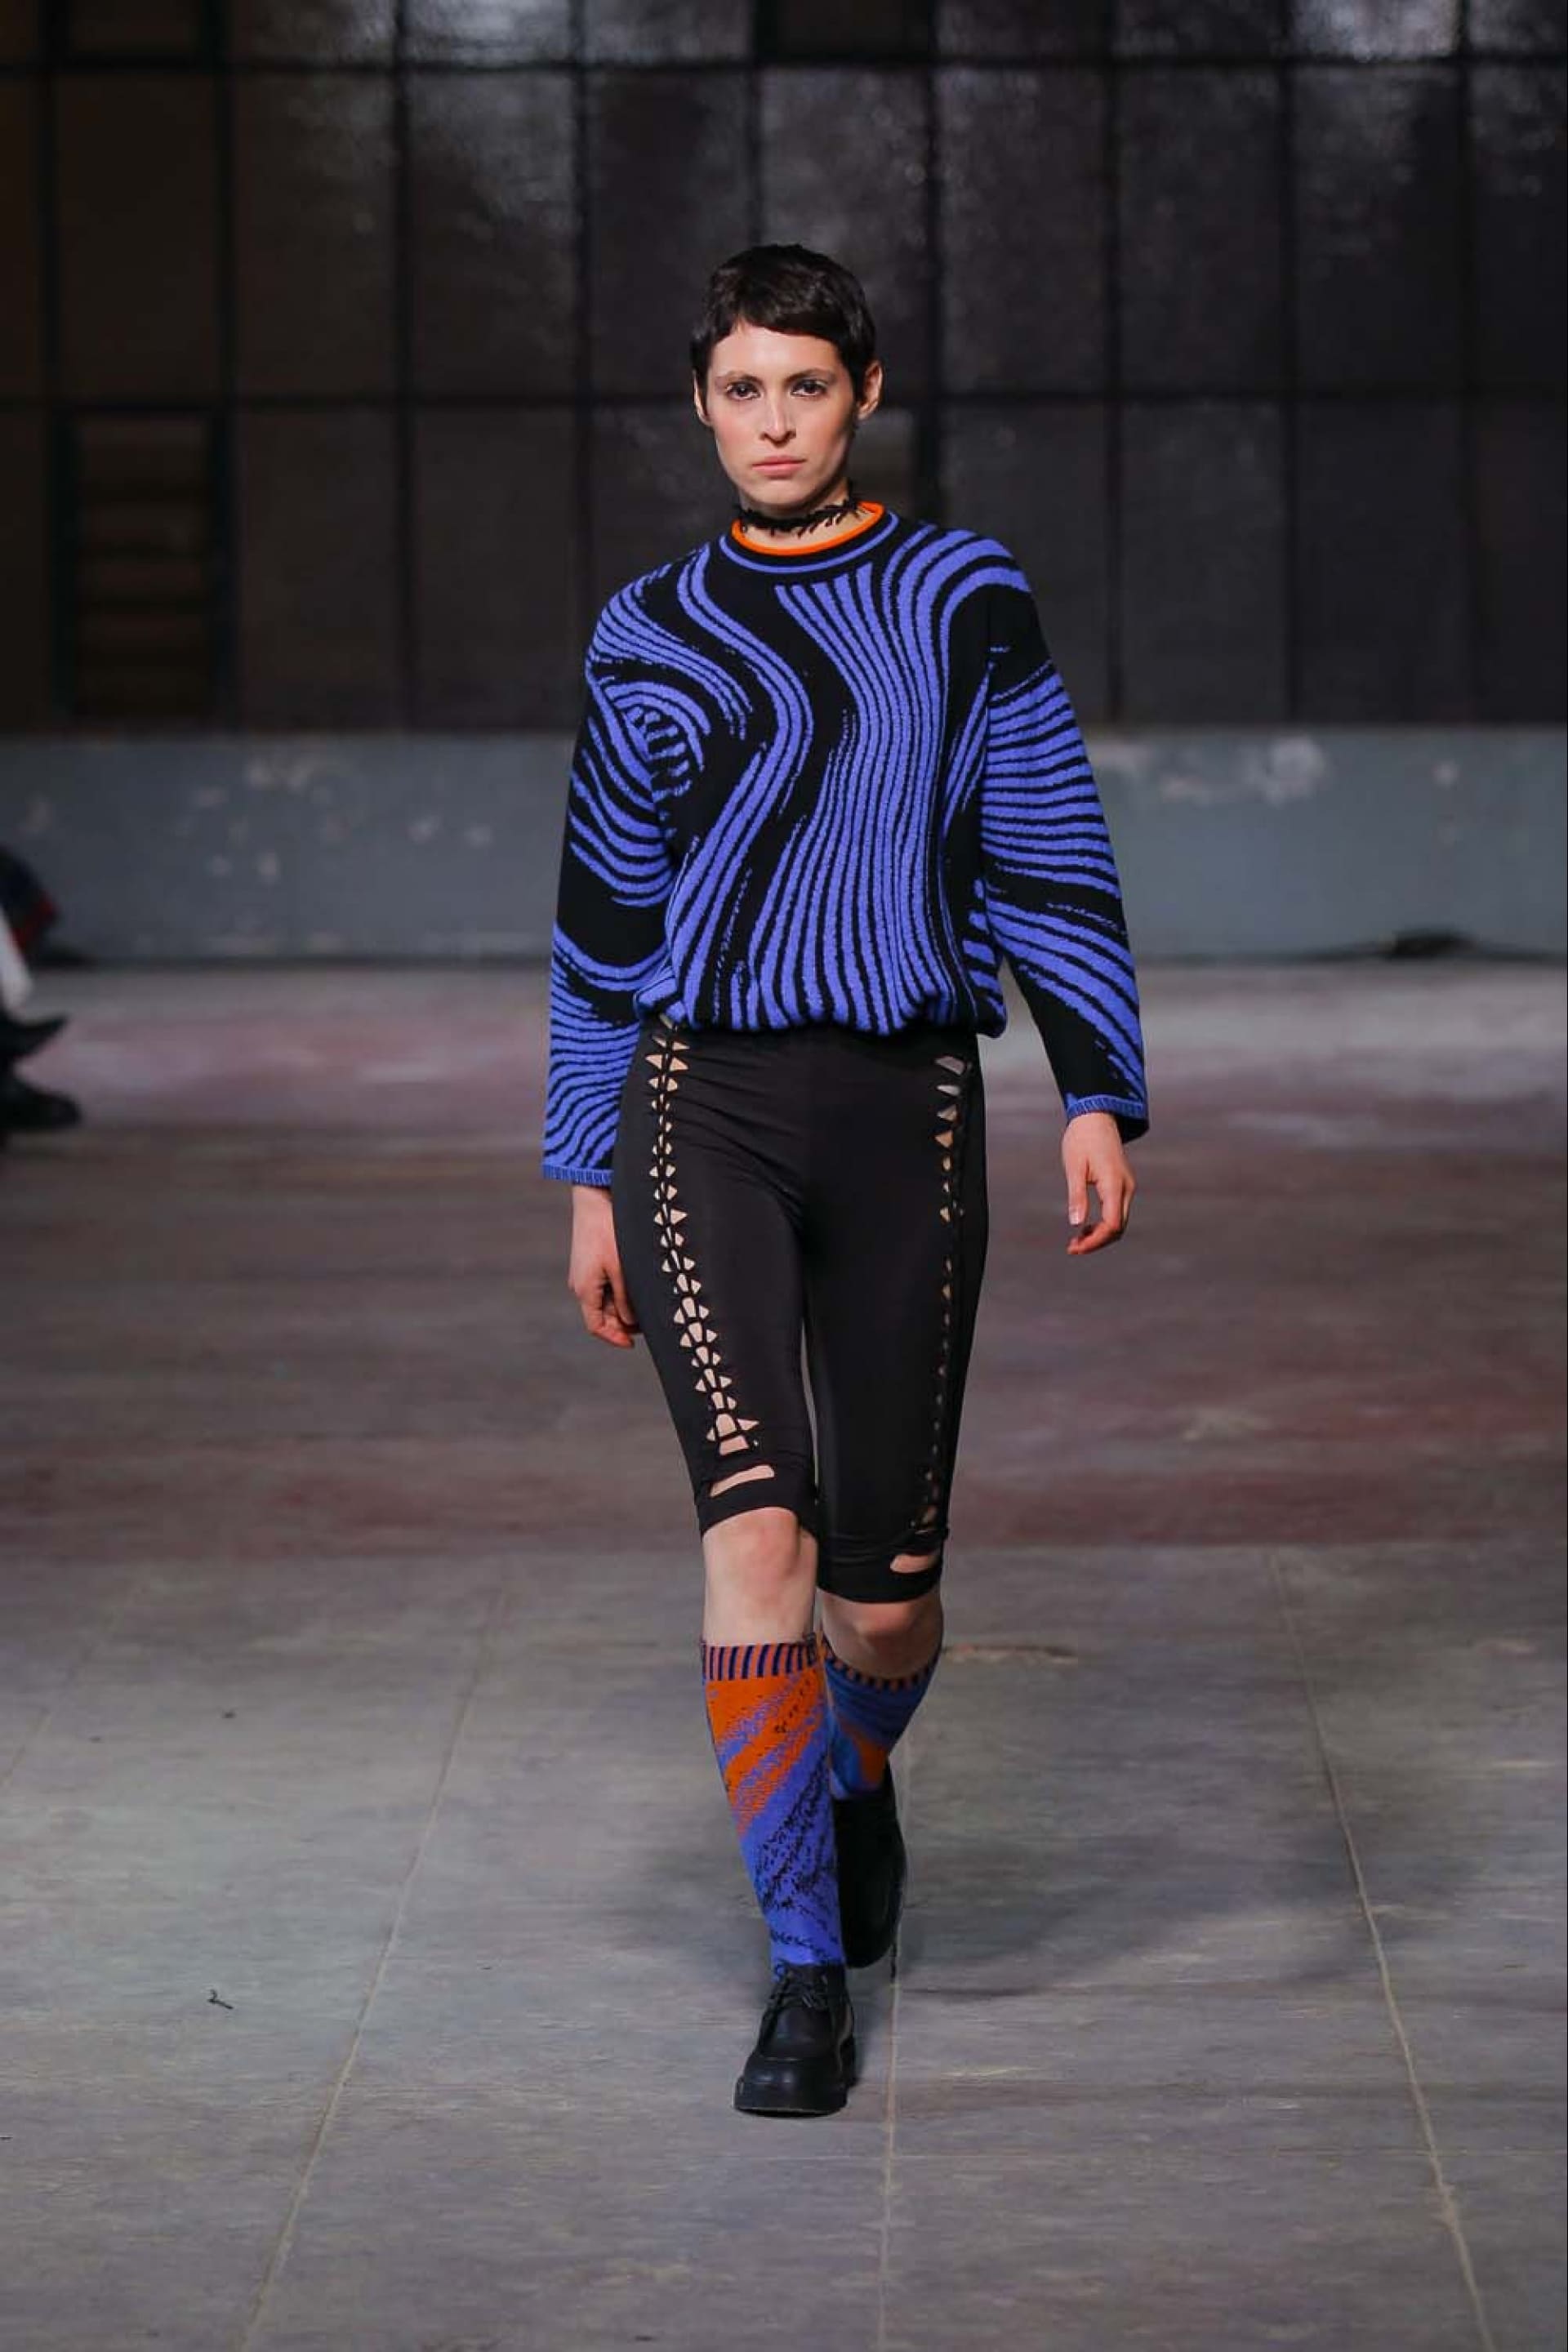 Knitwear Jacquard sweater in black and blue